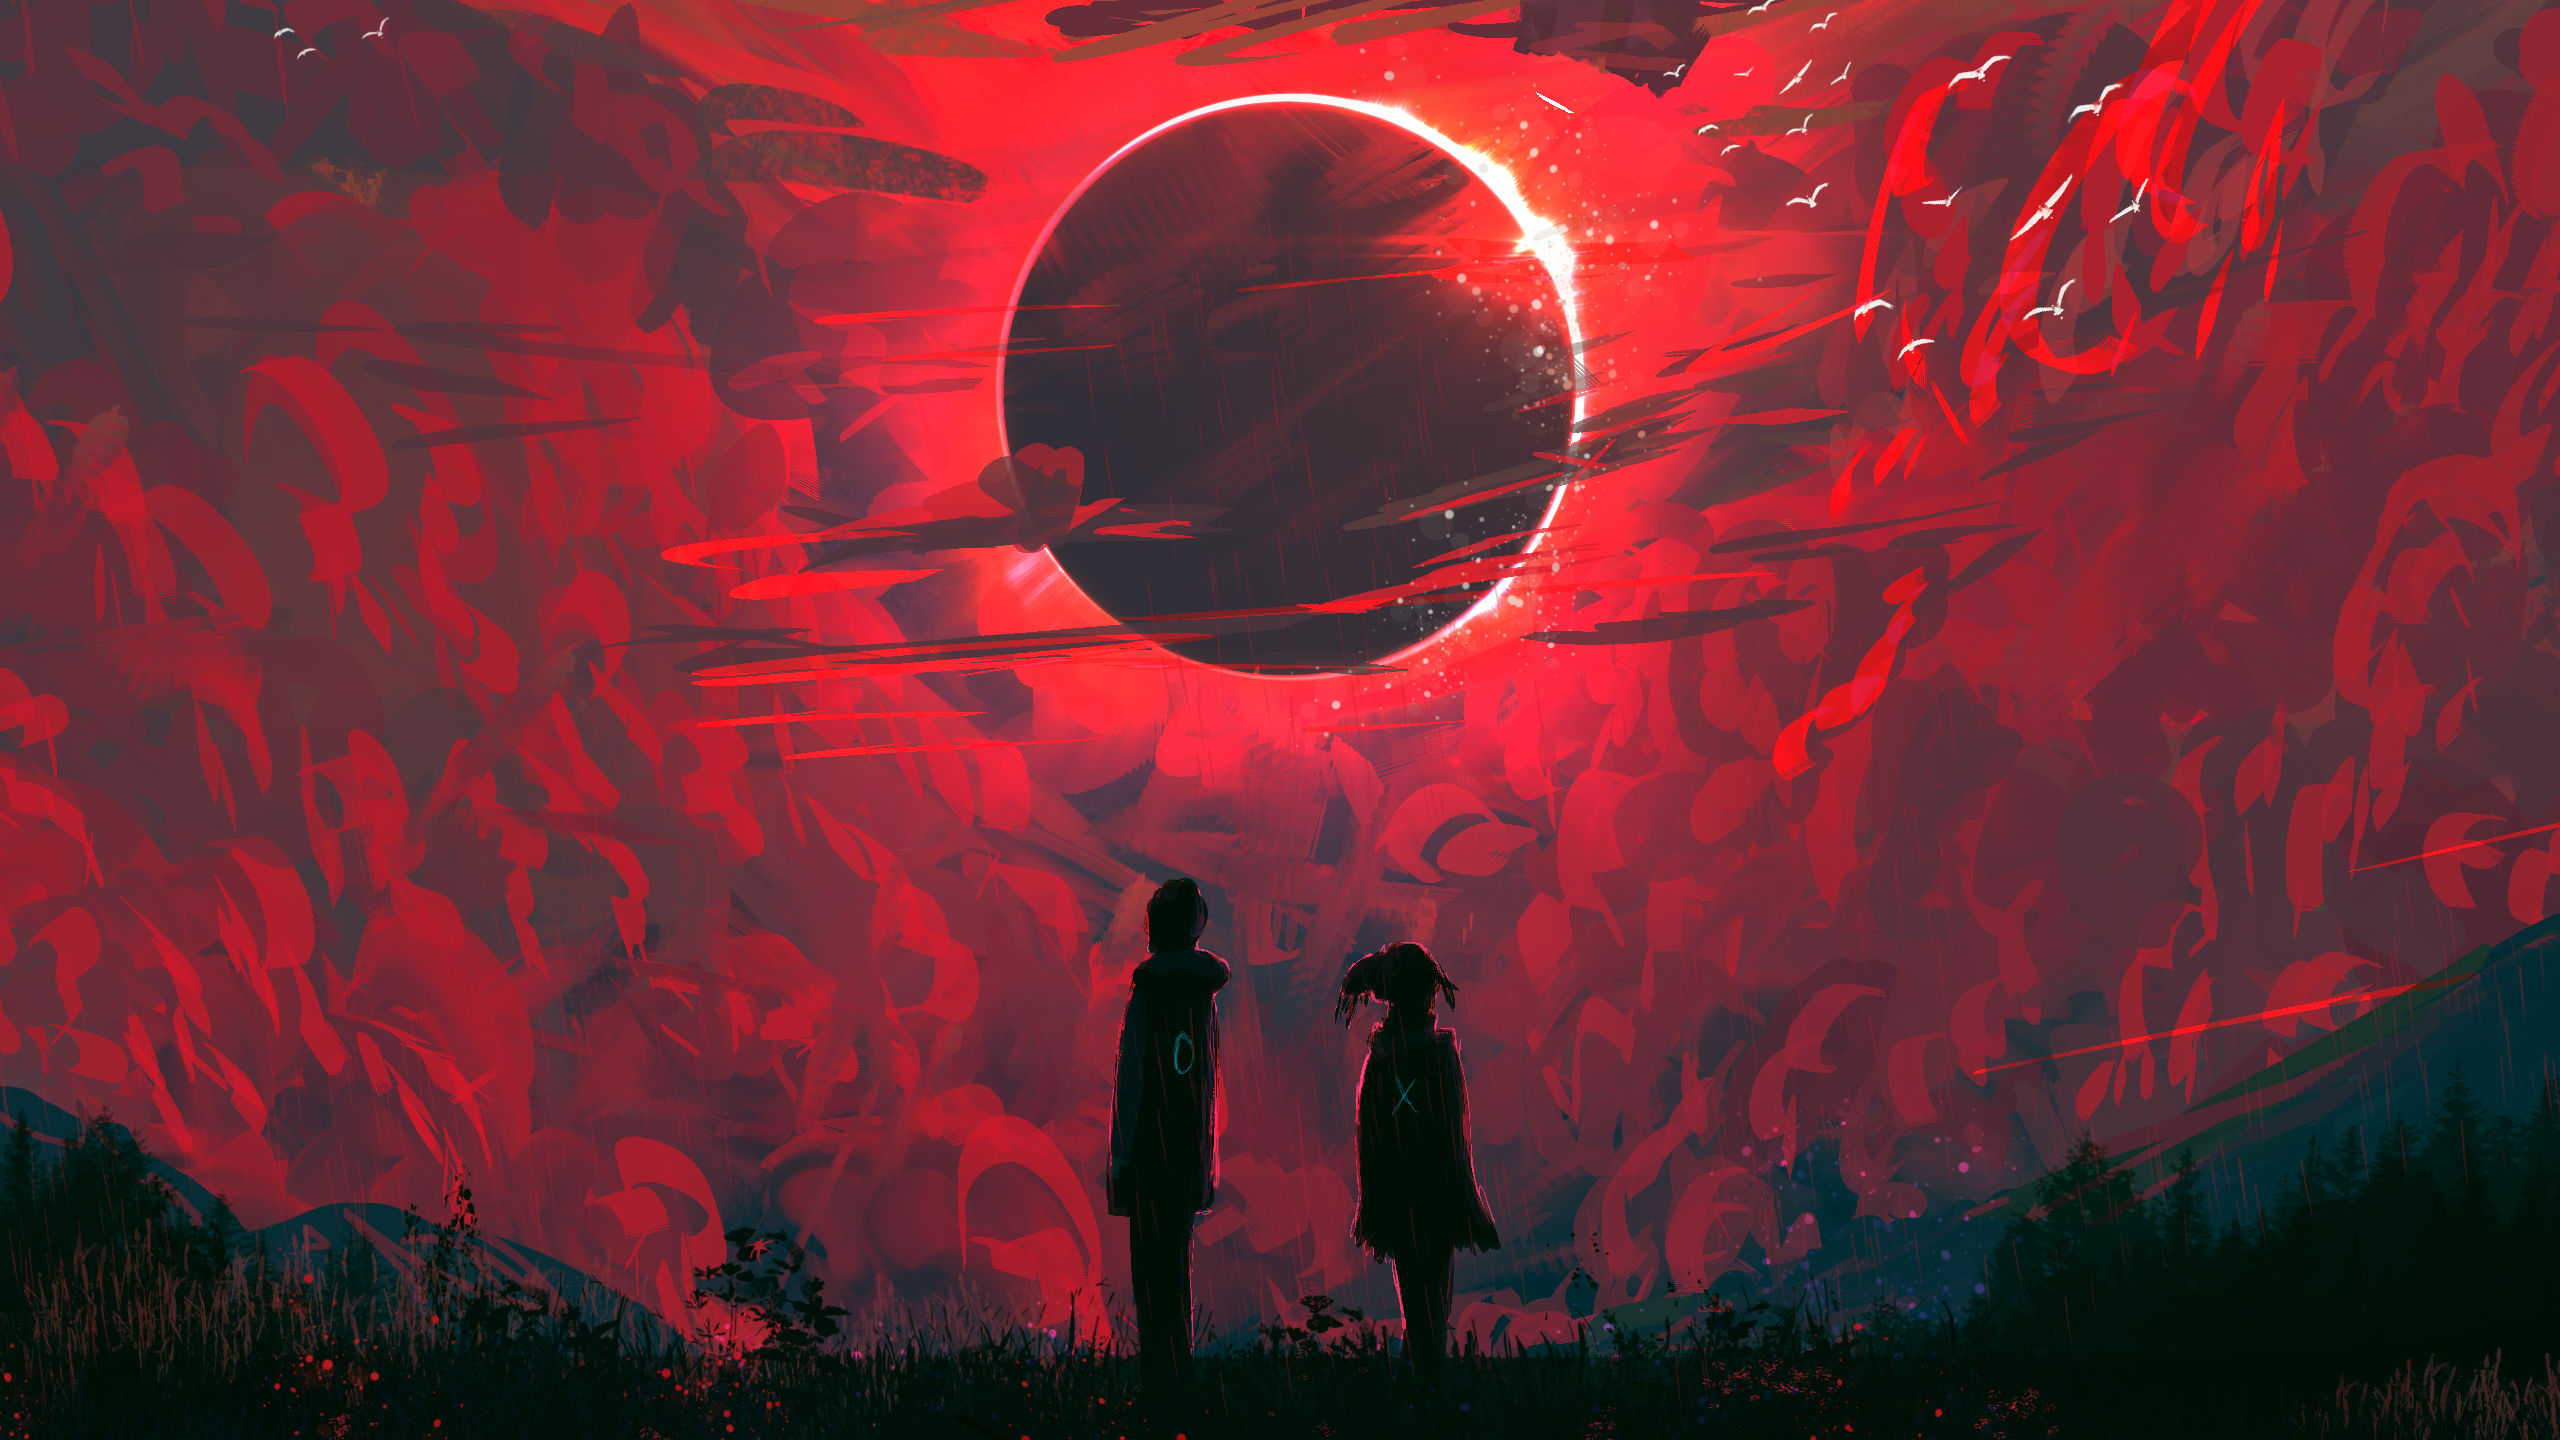 Nafay Digital Illustration Digital Art Artwork Abstract Nature Planet Clouds Couple Red Eclipse 2560x1440